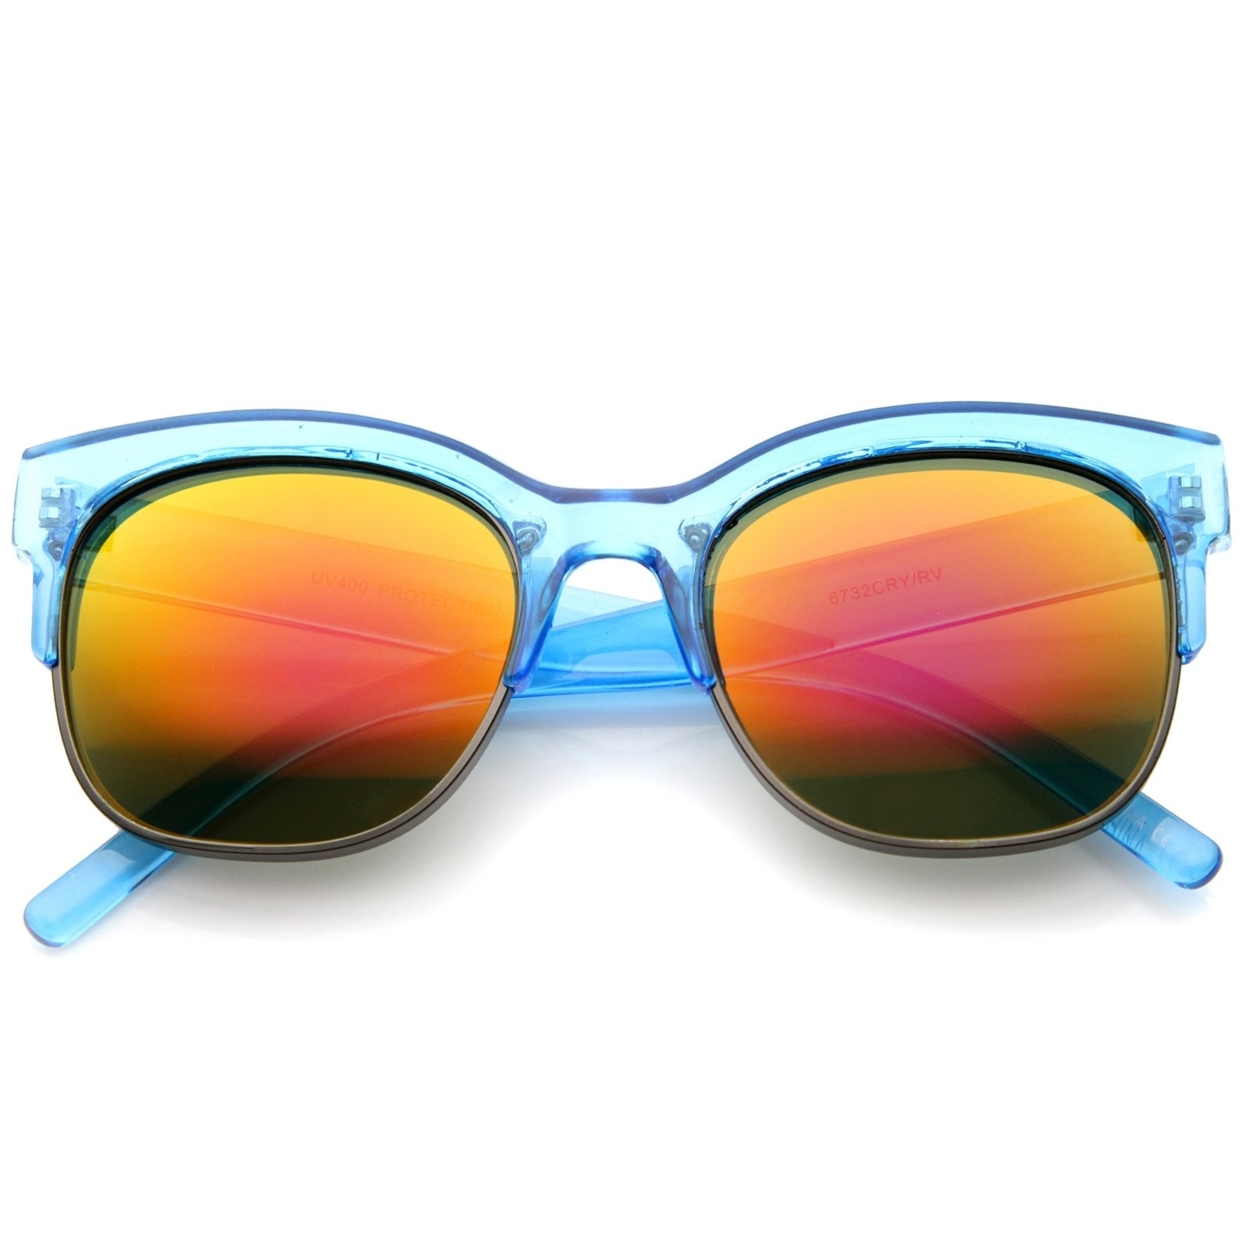 Bold Colorful Half-Frame Two-Toned Inset Mirrored Lens Horn Rimmed Sunglasses - Blue-Gunmetal / Red Mirror